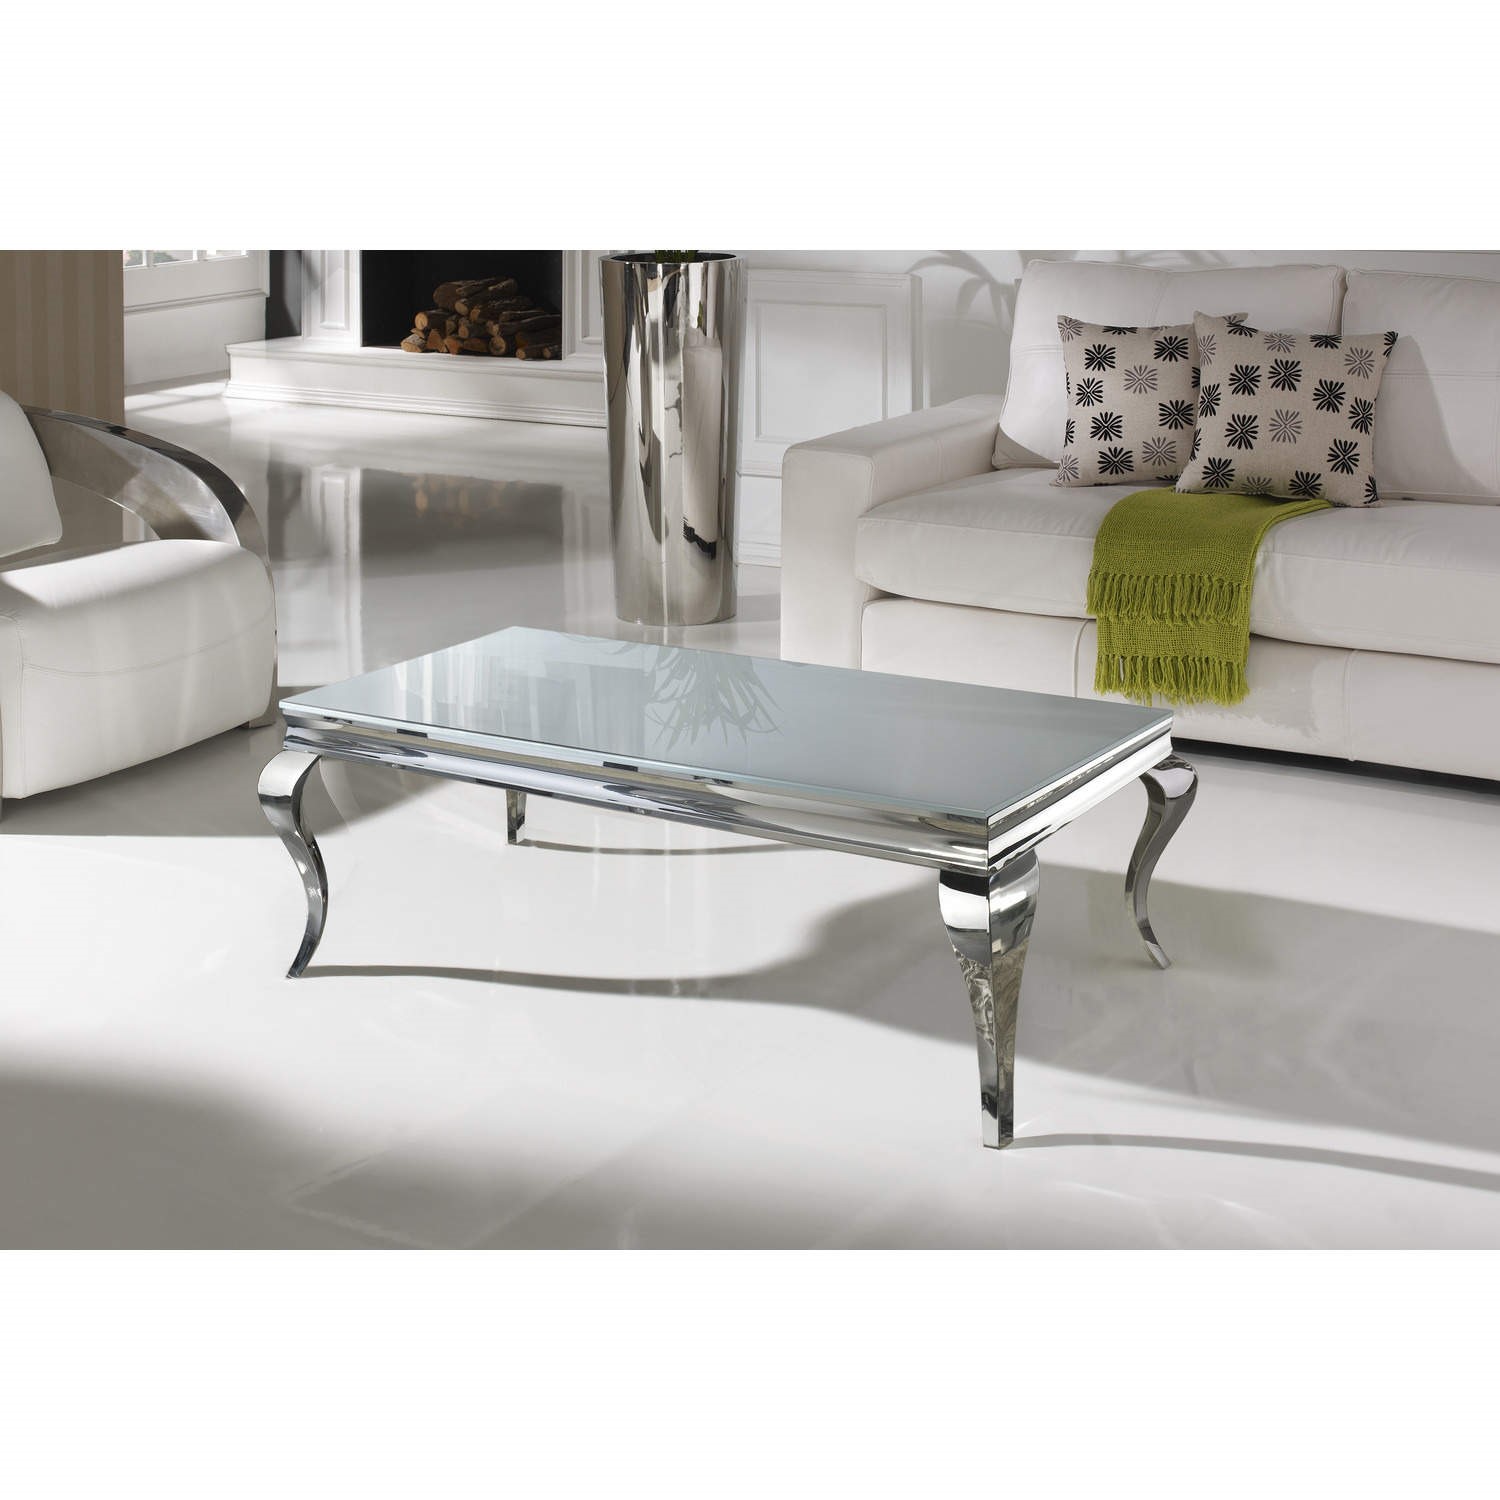 Louis Large Mirrored Coffee Table In, Long Mirrored Coffee Table